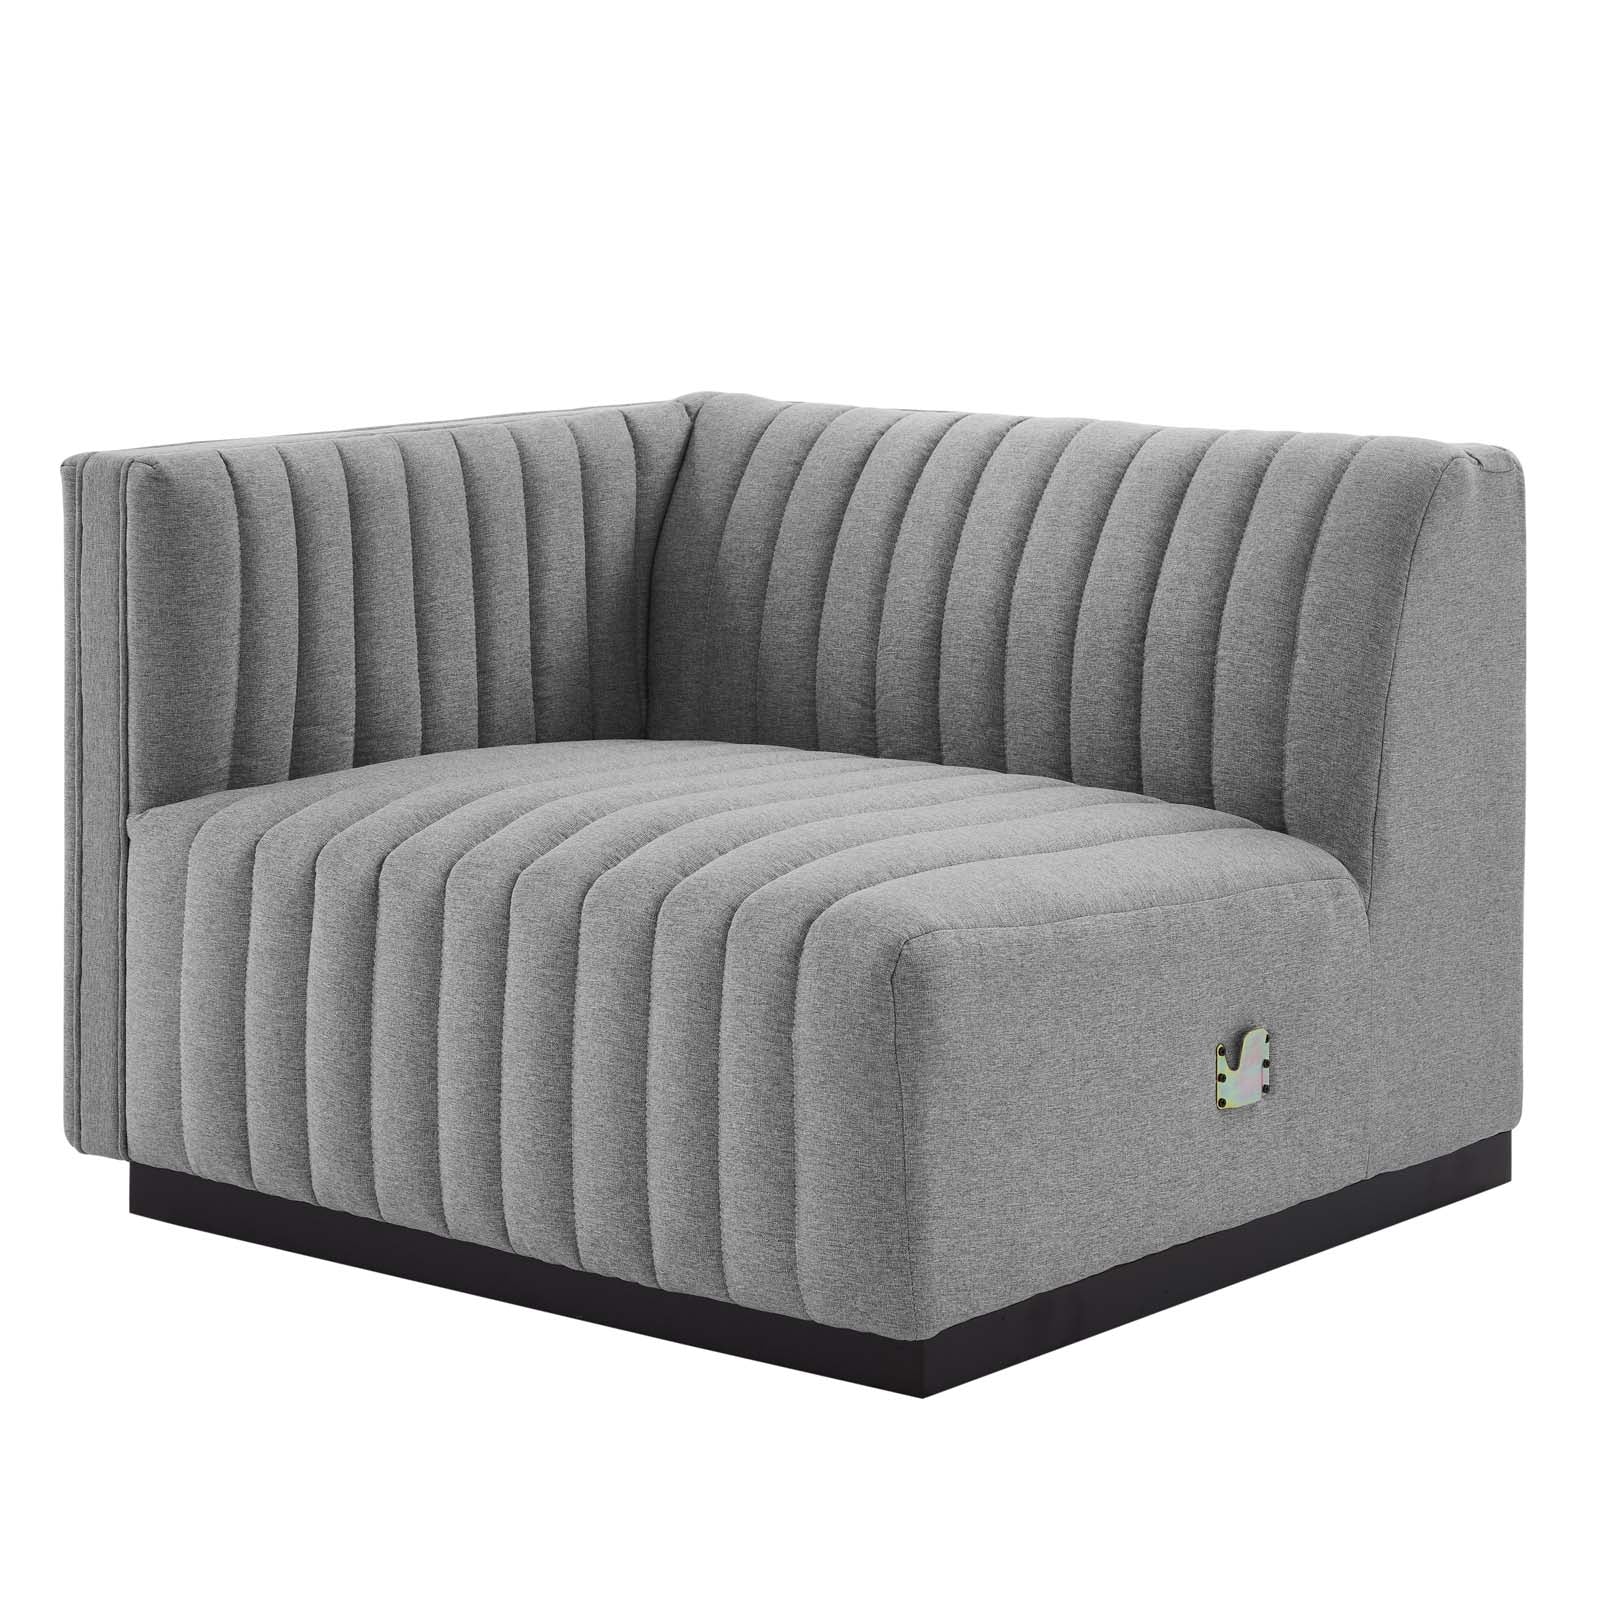 Modway Accent Chairs - Conjure Channel Tufted Upholstered Fabric Left-Arm Chair Black Light Gray